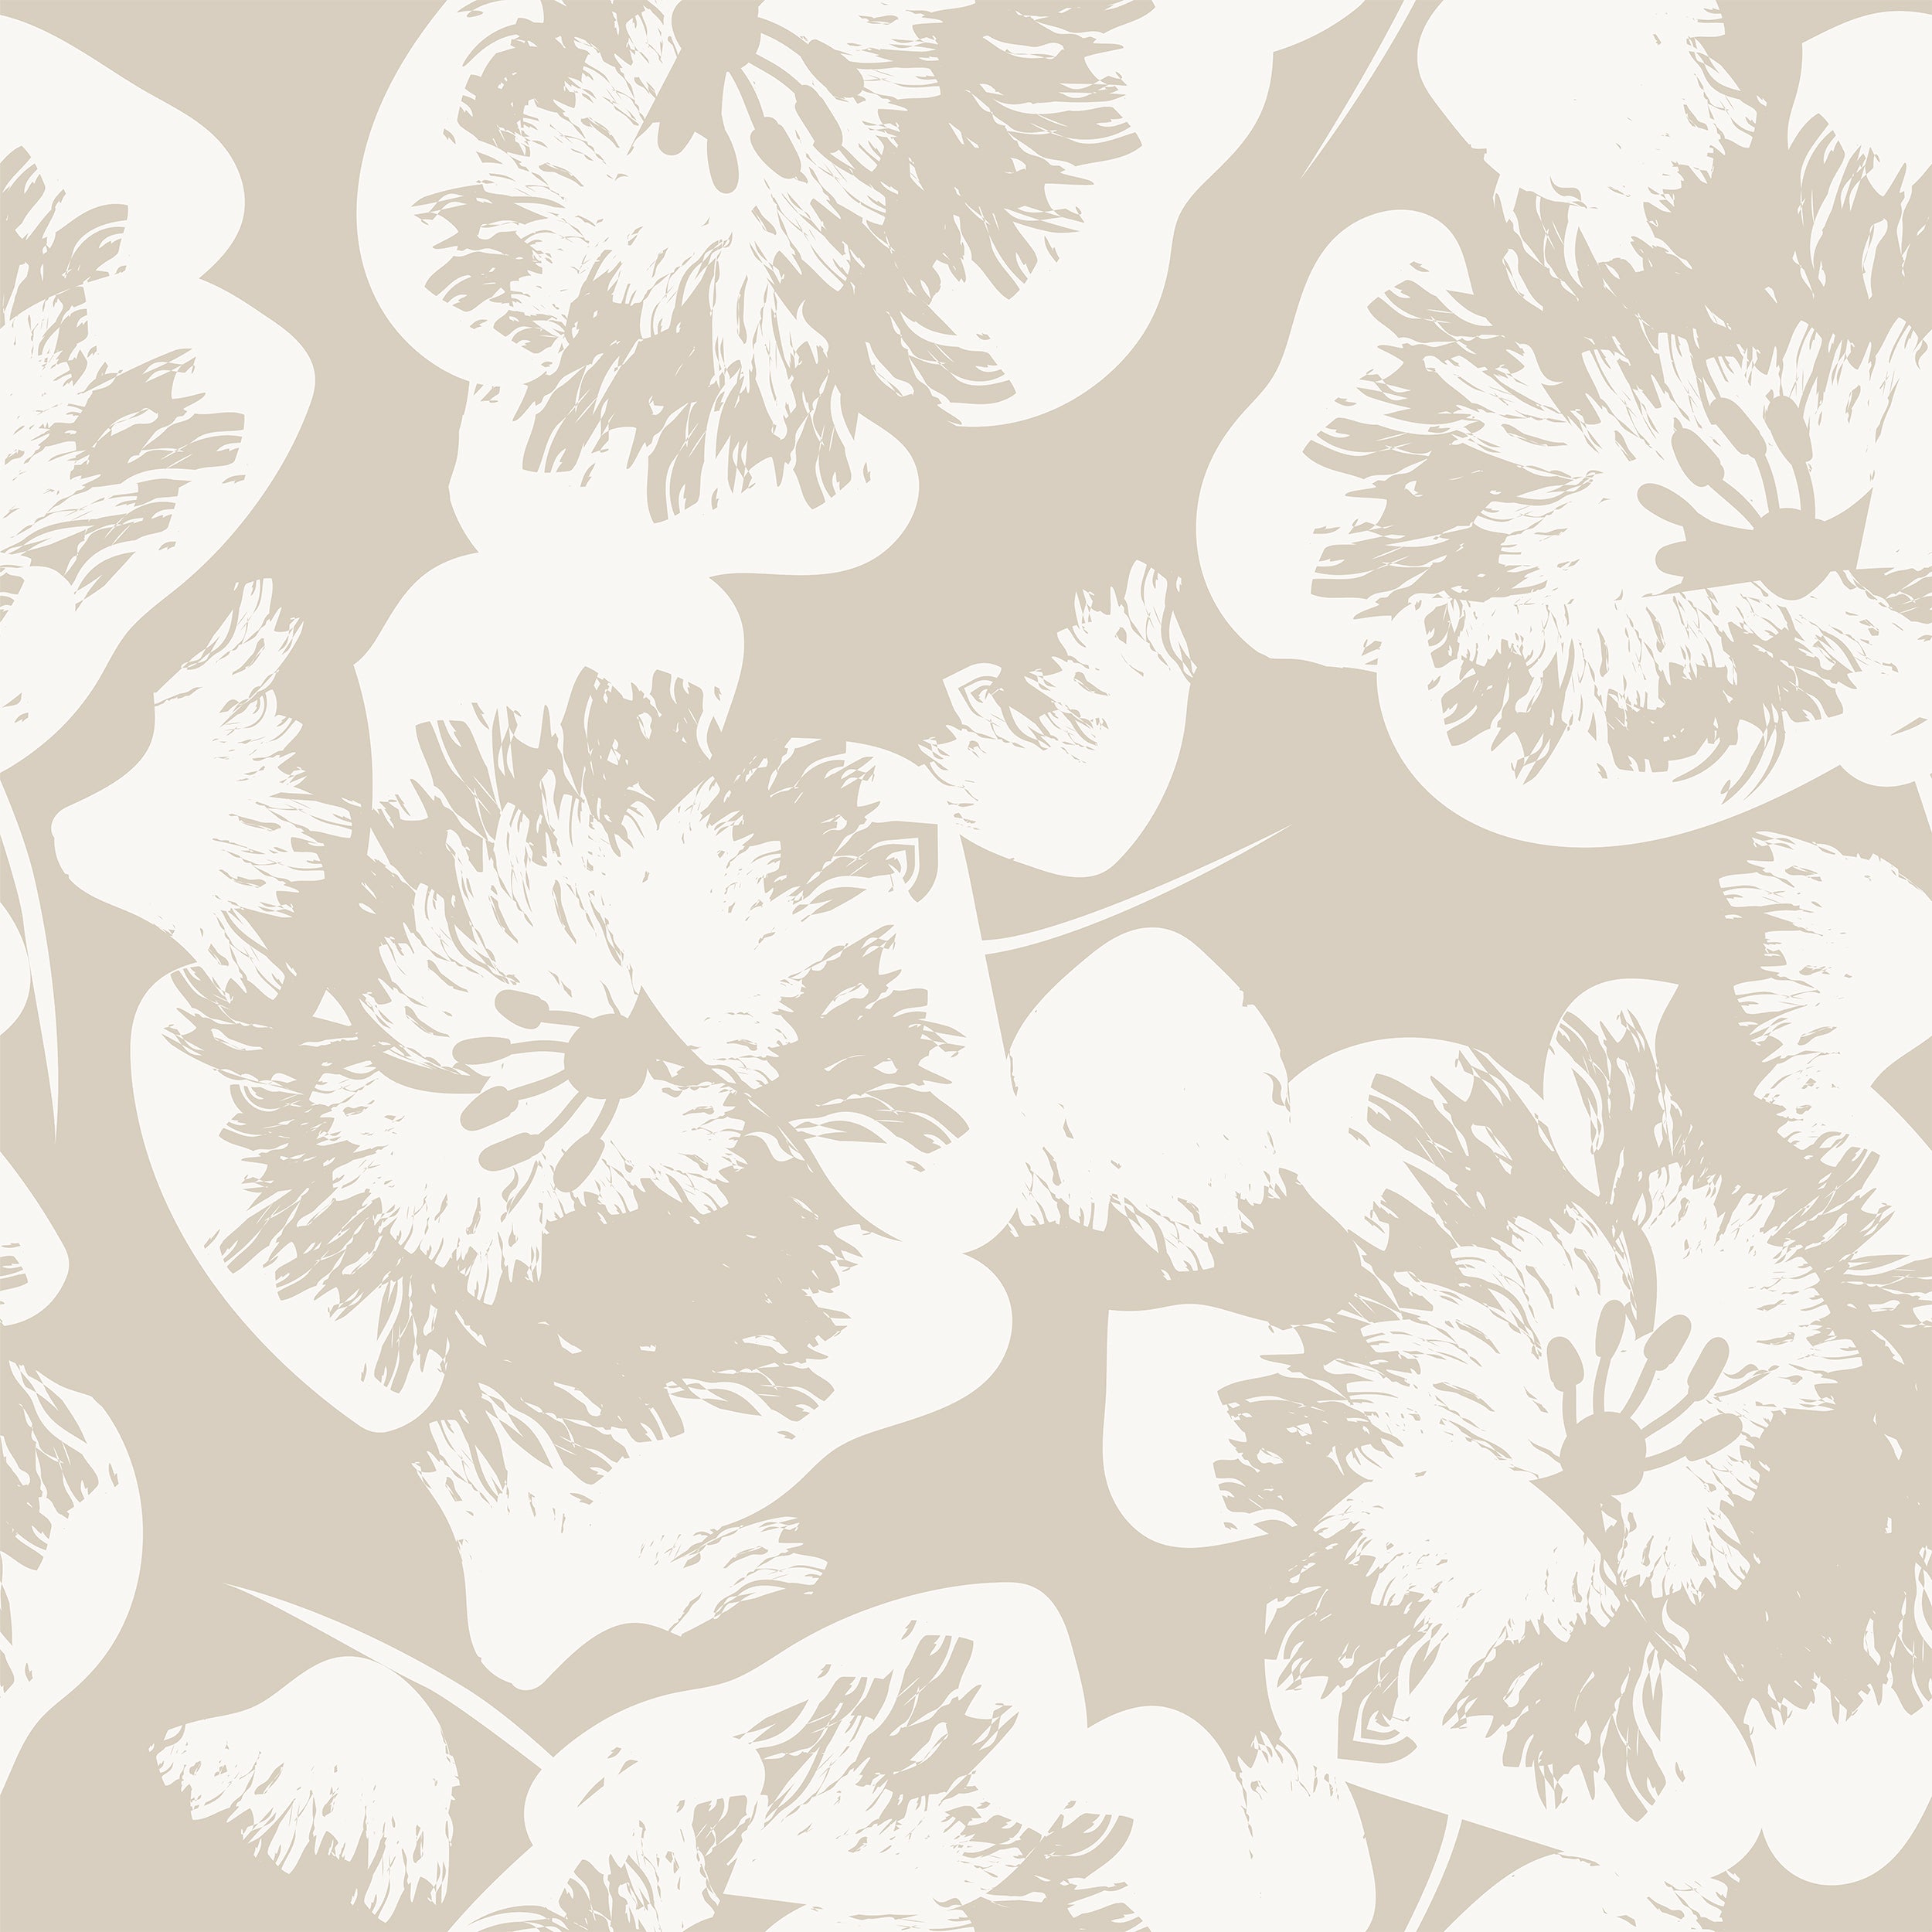 A close-up of the Stamped Floral Wallpaper illustrating the texture and detail of the beige floral design. The pattern offers a hand-stamped look that gives the room a bespoke, artisanal charm